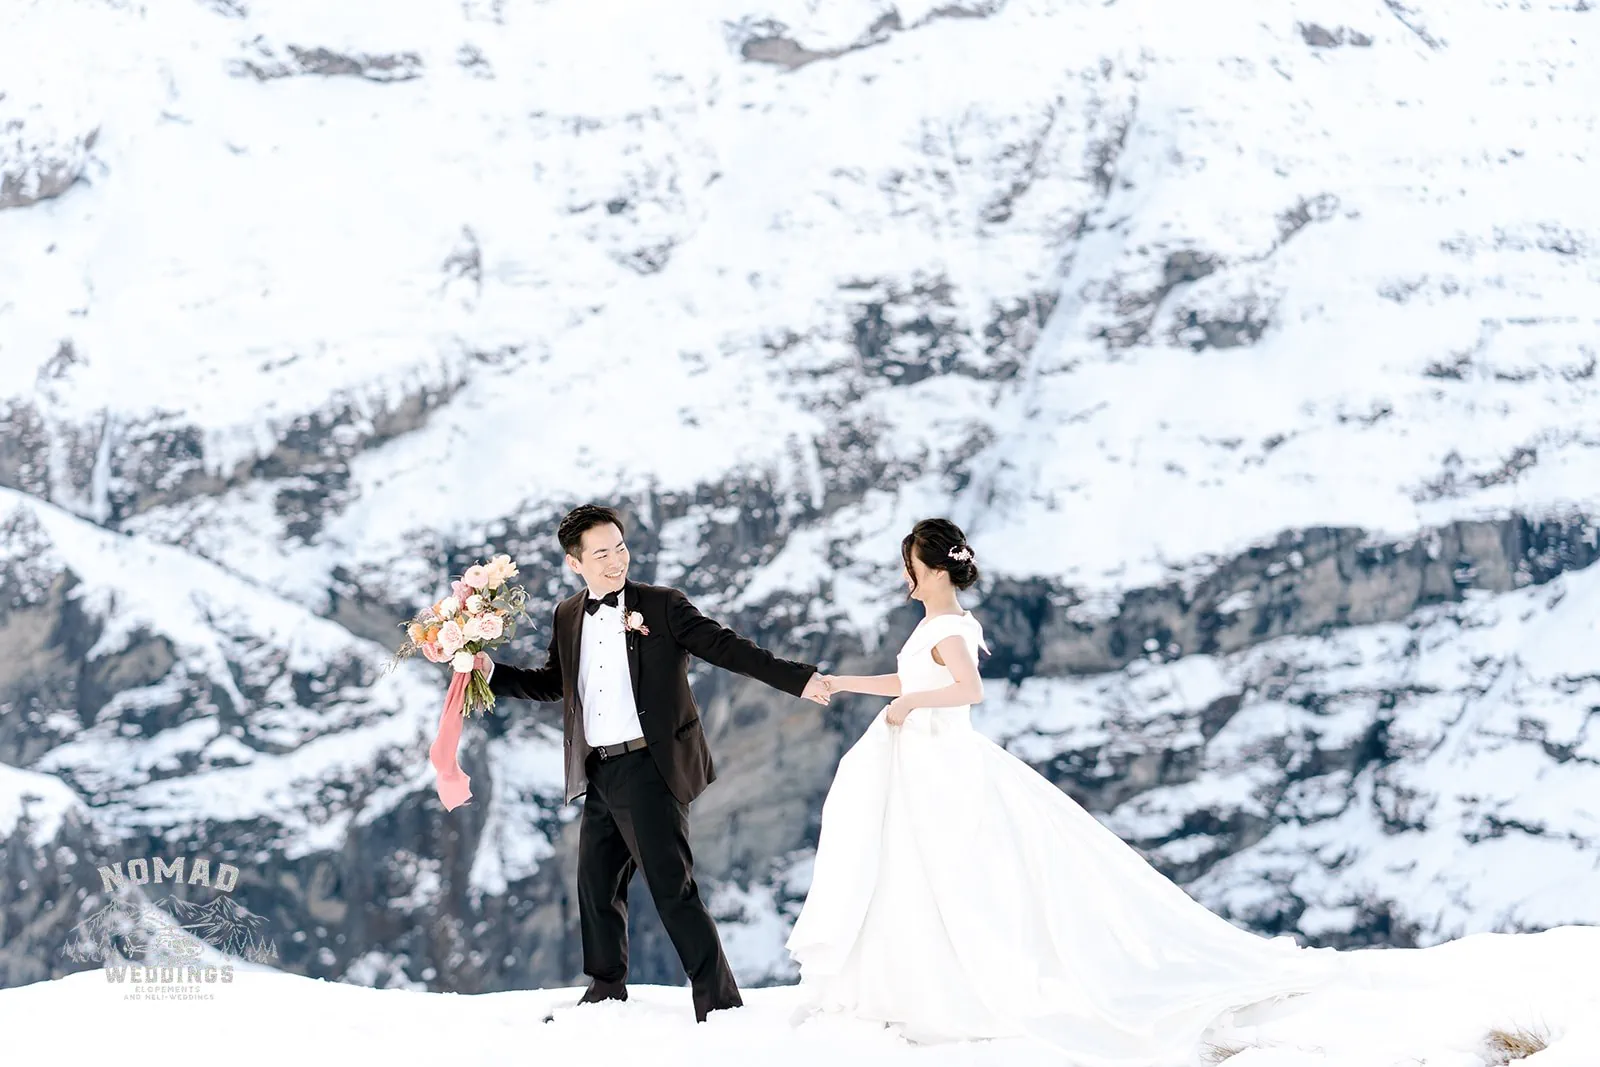 Queenstown New Zealand Elopement Wedding Photographer - Bo and Junyi, a bride and groom, enjoying a Heli Pre Wedding Shoot with 4 Landings on top of a snow covered mountain.